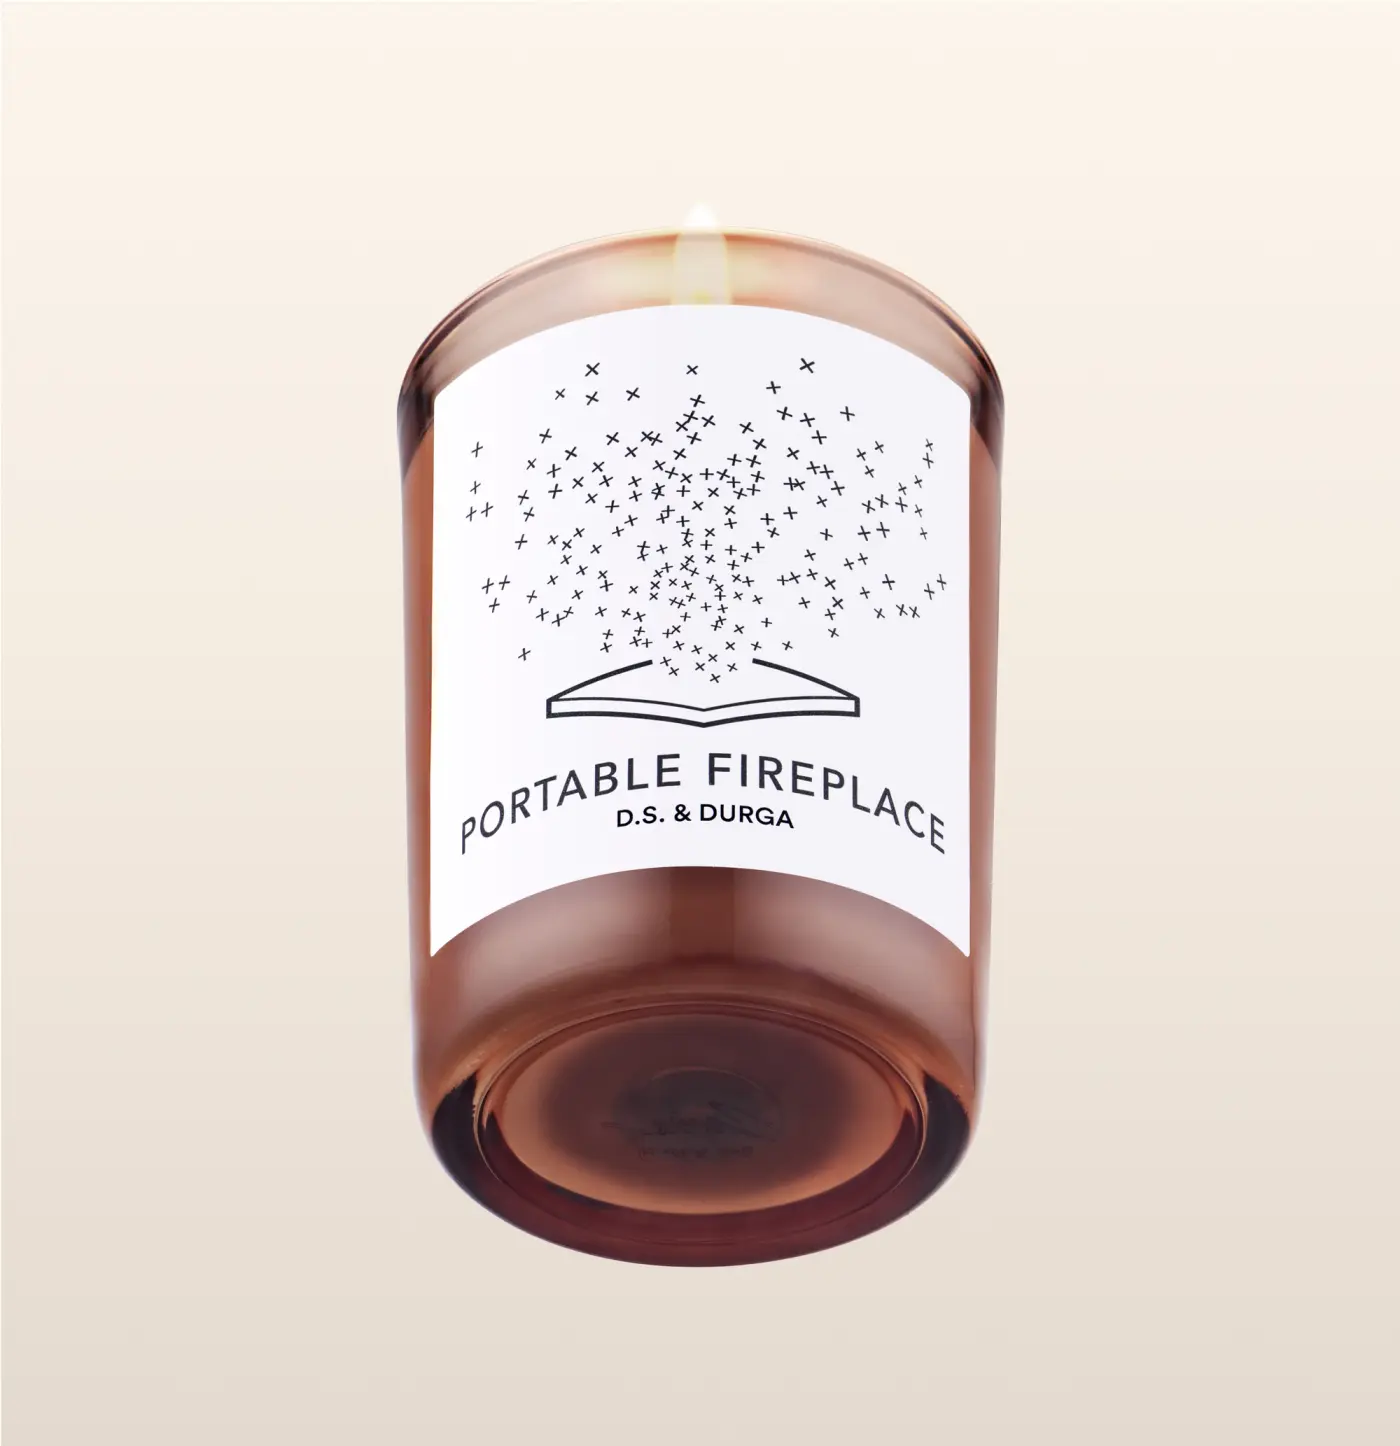 Portable Fireplace Candle by D.S. & Durga